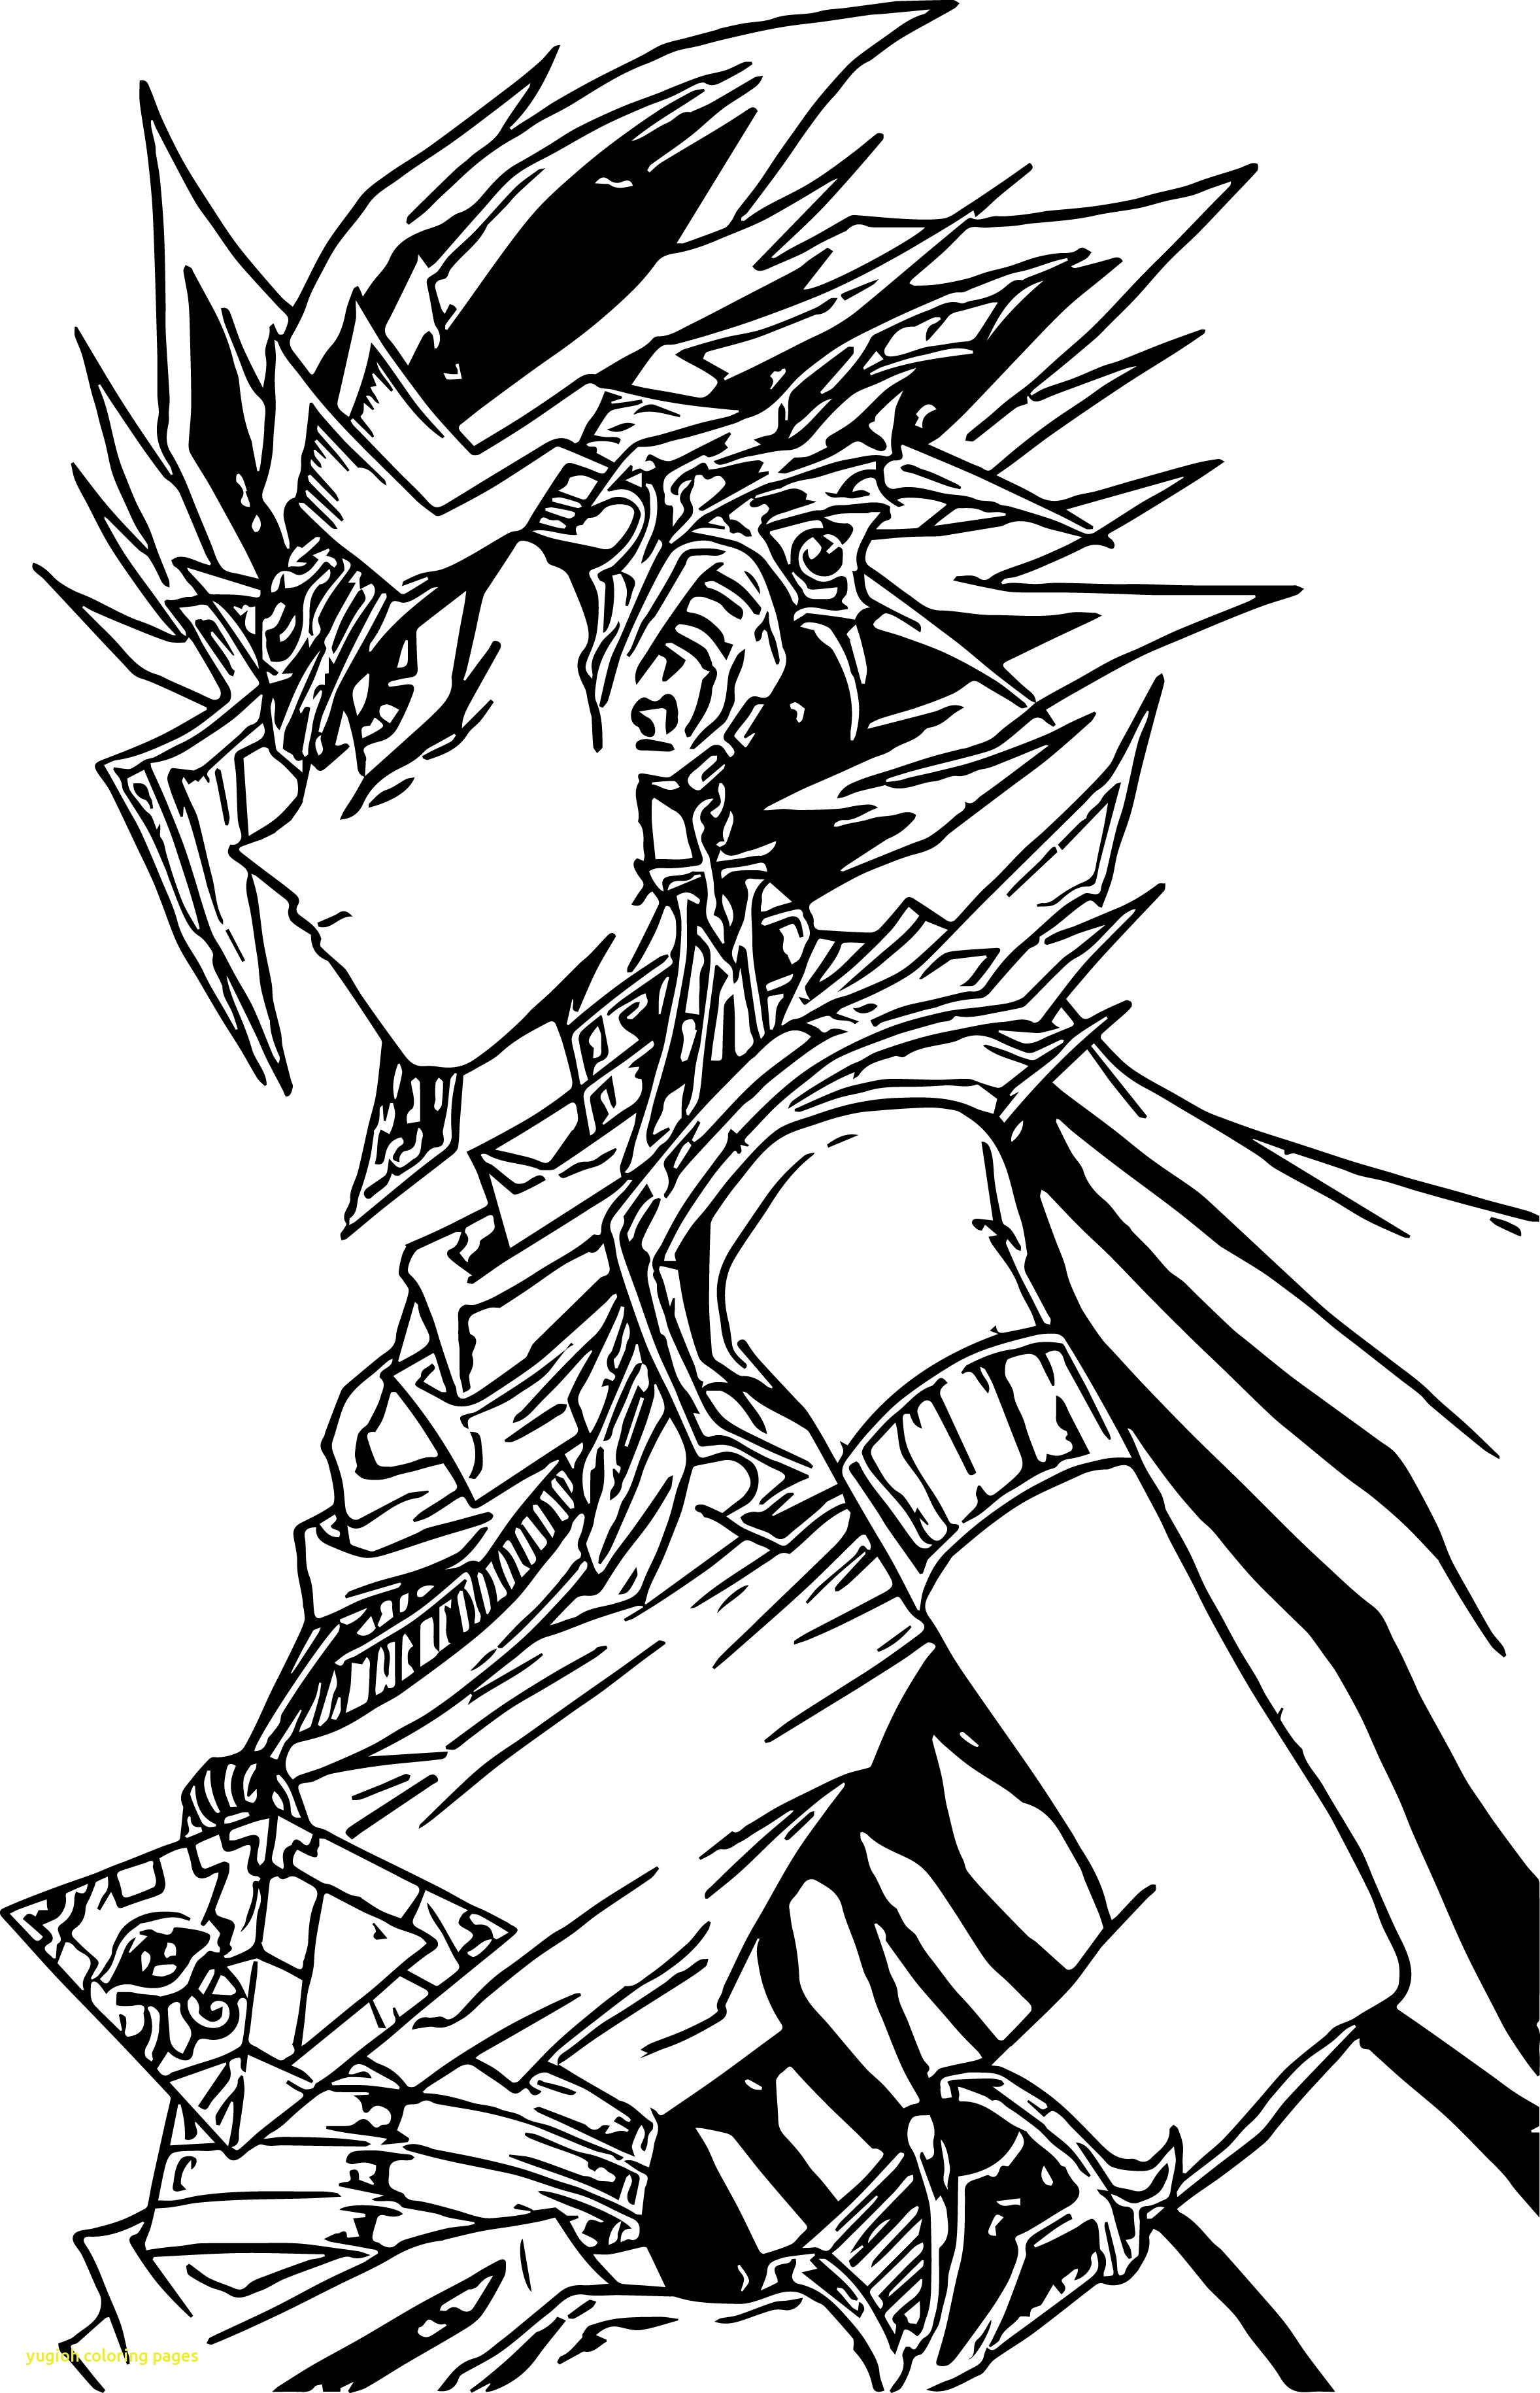 yugioh-printable-coloring-pages-at-getcolorings-free-printable-colorings-pages-to-print